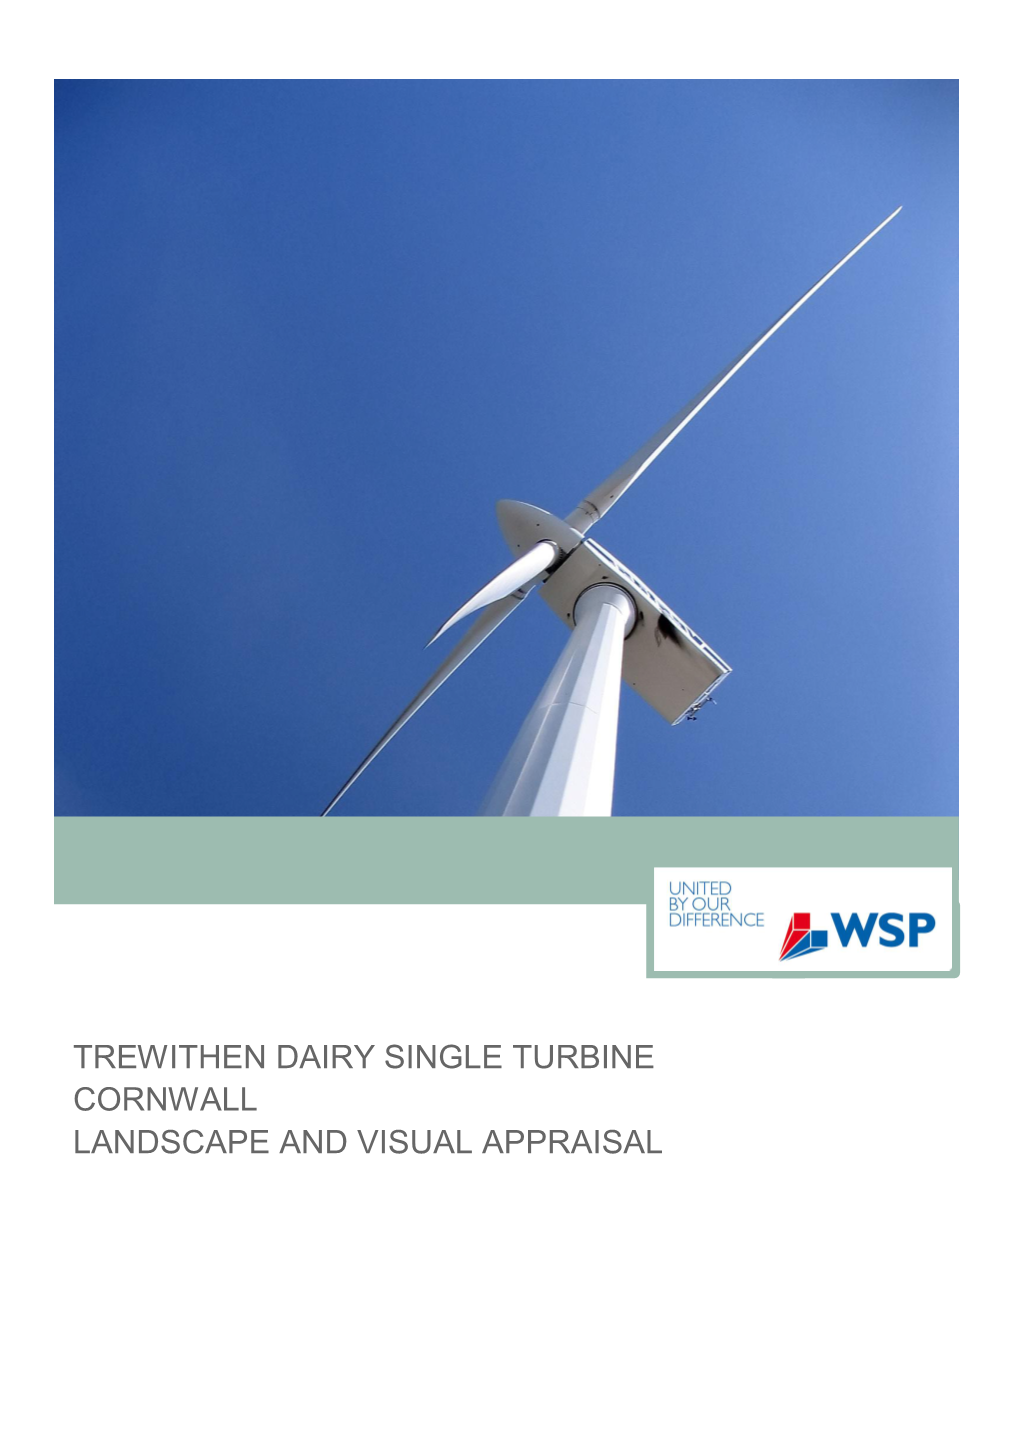 Trewithen Dairy Single Turbine Cornwall Landscape and Visual Appraisal